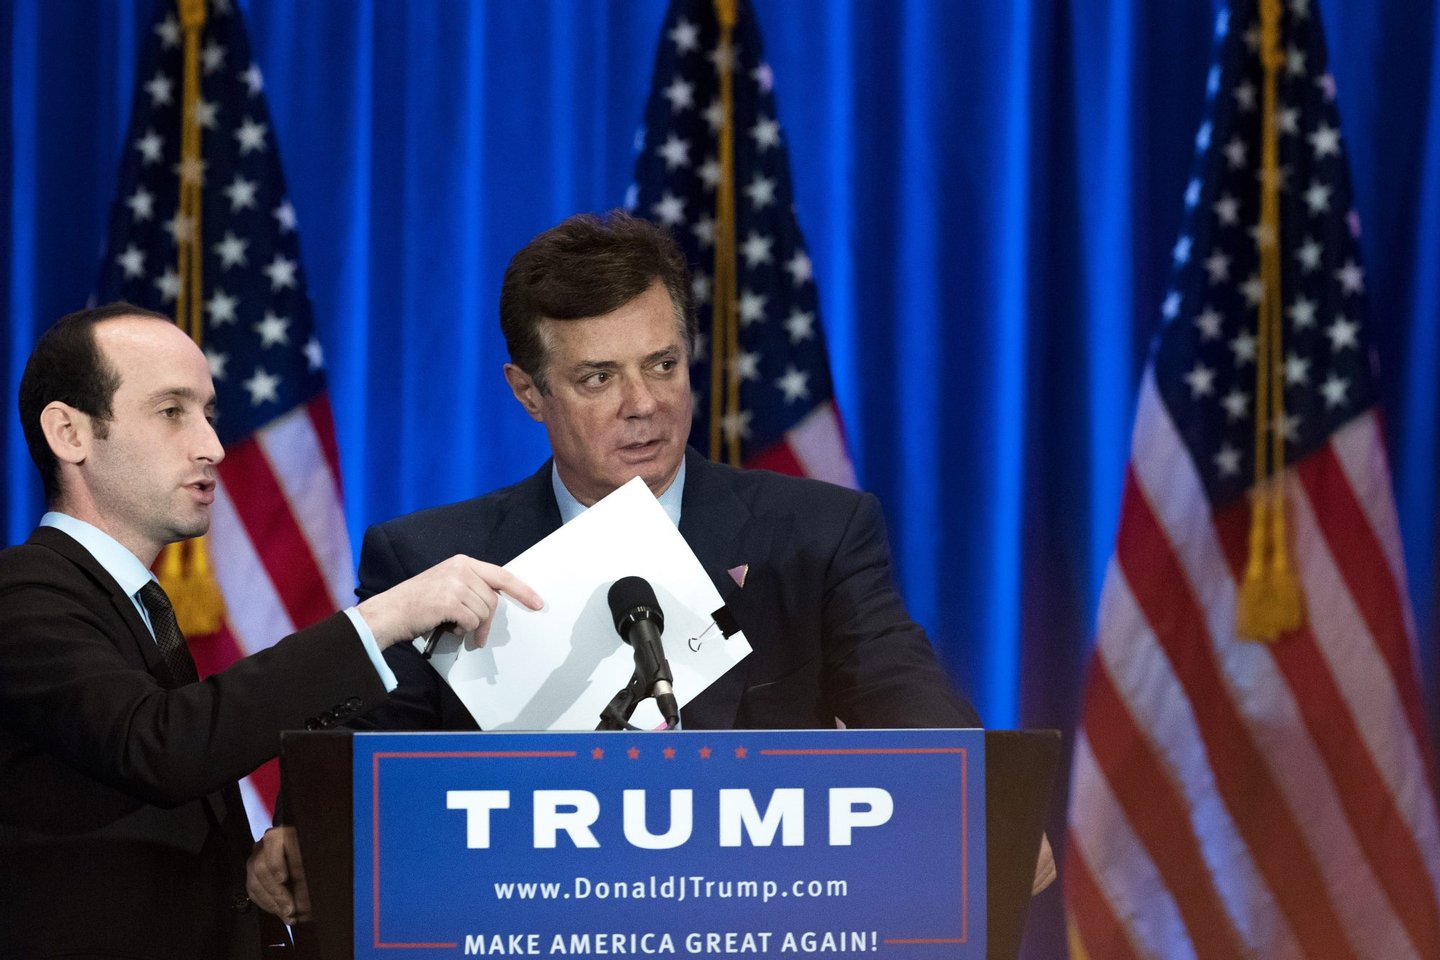 NEW YORK, NY - JUNE 22: Campaign chairman Paul Manafort checks the podium before Republican Presidential candidate Donald Trump speaks during an event at Trump SoHo Hotel, June 22, 2016 in New York City. Trump's remarks focused on criticisms of Democratic presidential candidate Hillary Clinton. (Photo by Drew Angerer/Getty Images)